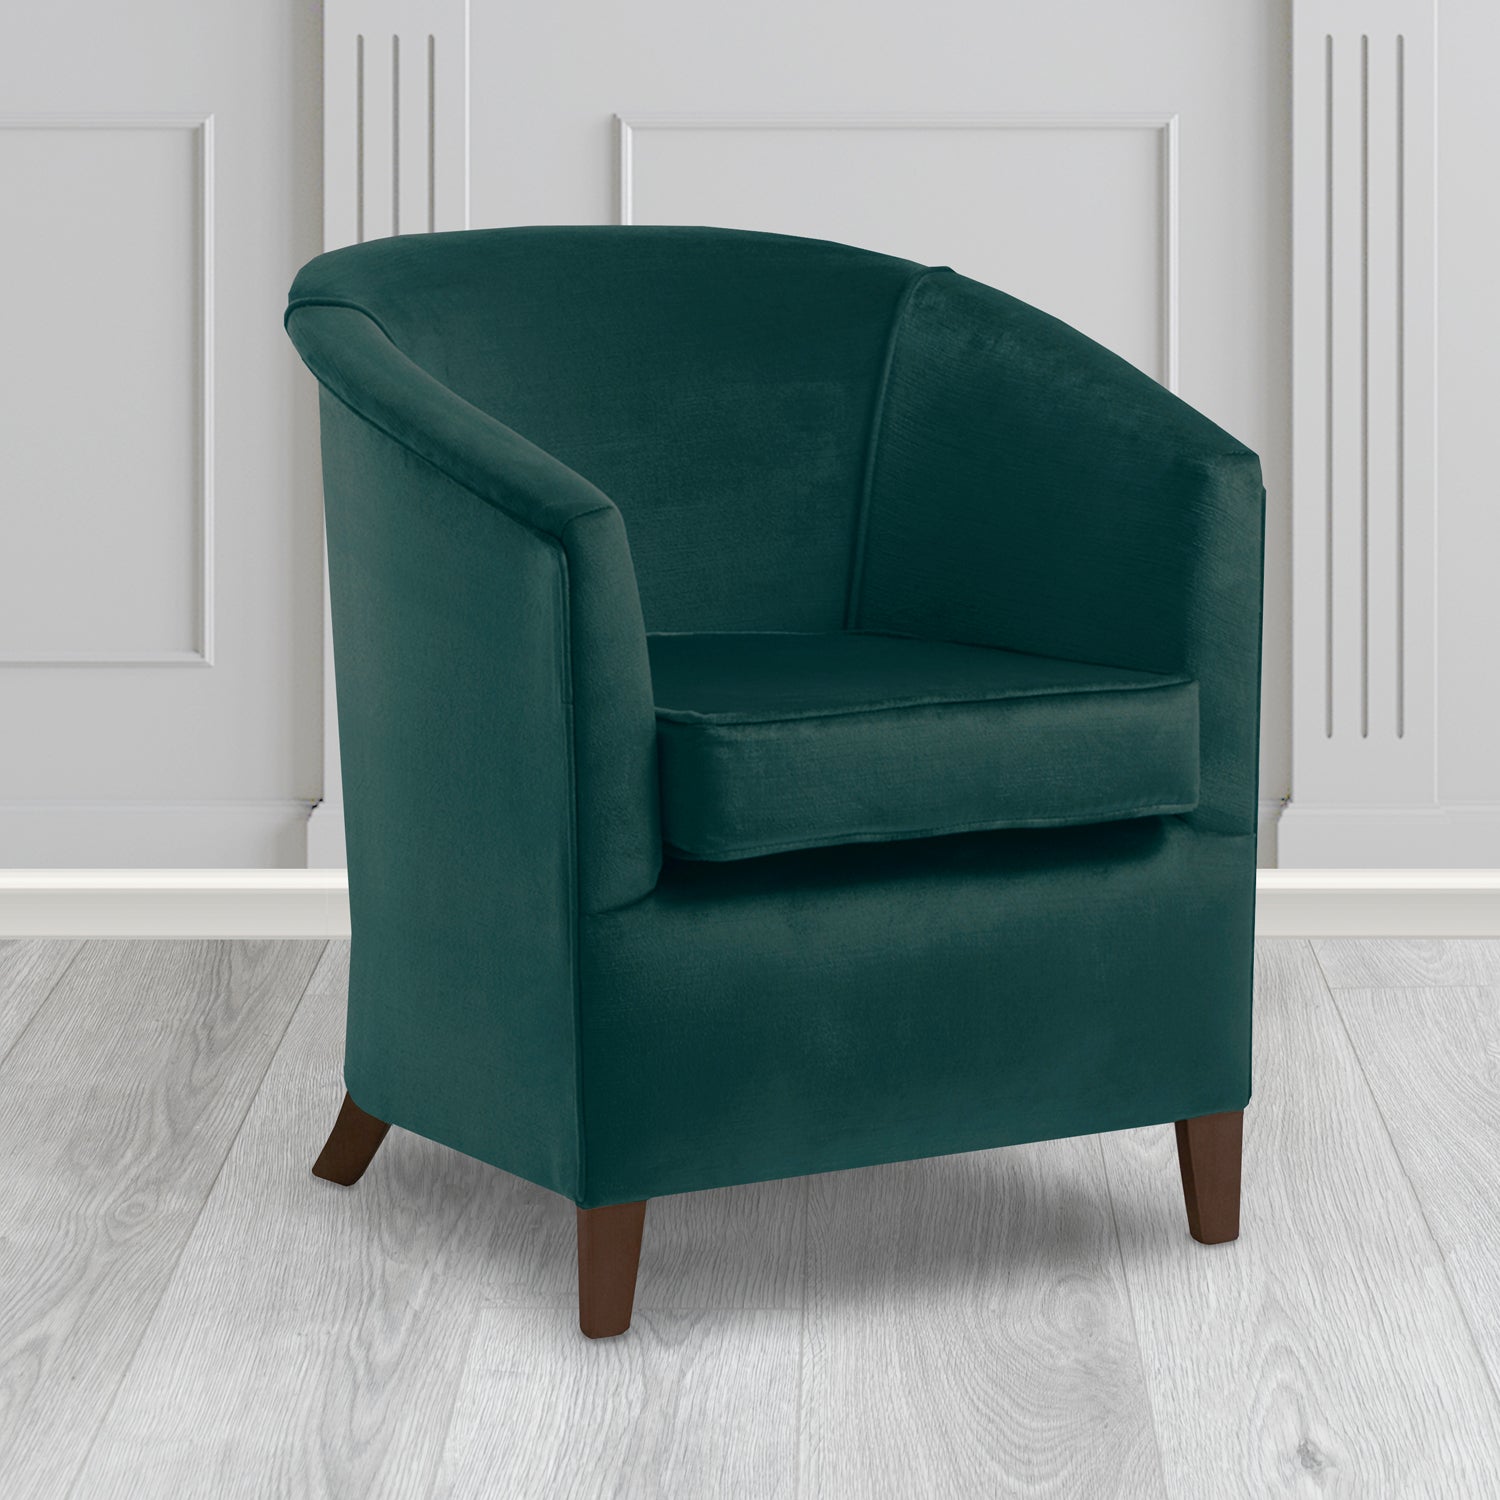 Jasmine Tub Chair in Noble 203 Emerald Crib 5 Velvet Fabric - Water Resistant - The Tub Chair Shop